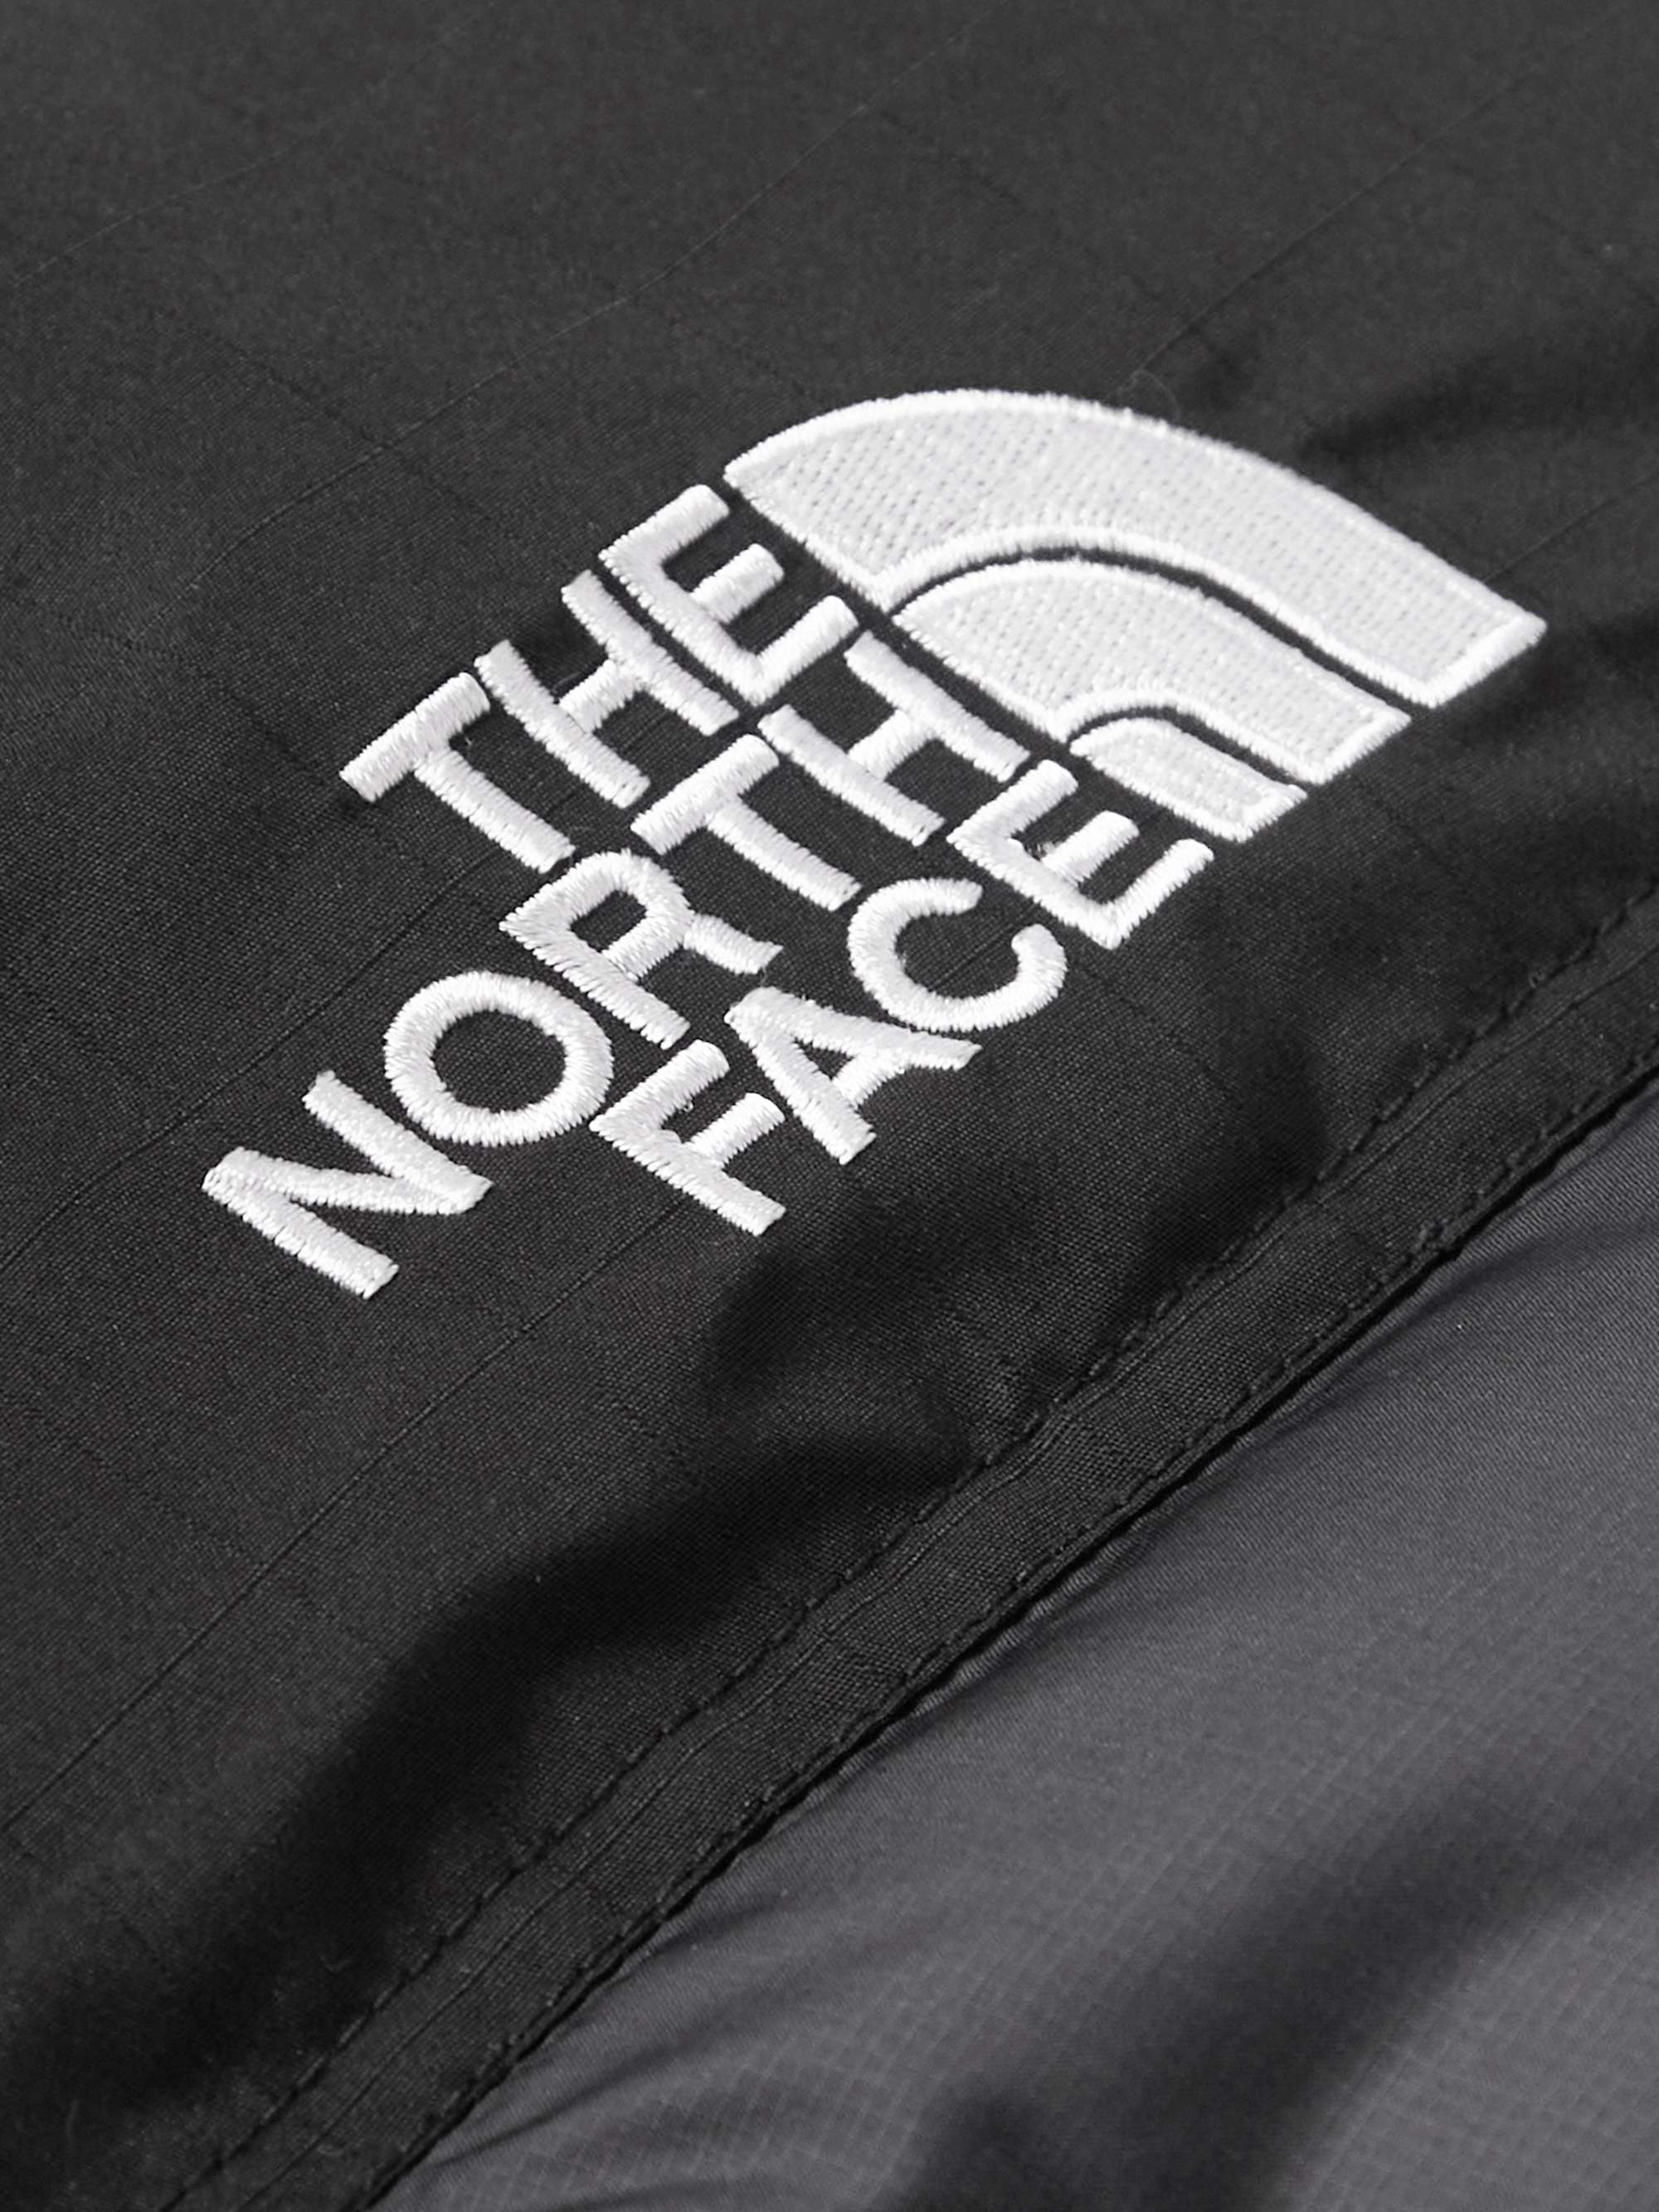 THE NORTH FACE BB HMLYN Quilted Ripstop Hooded Down Parka